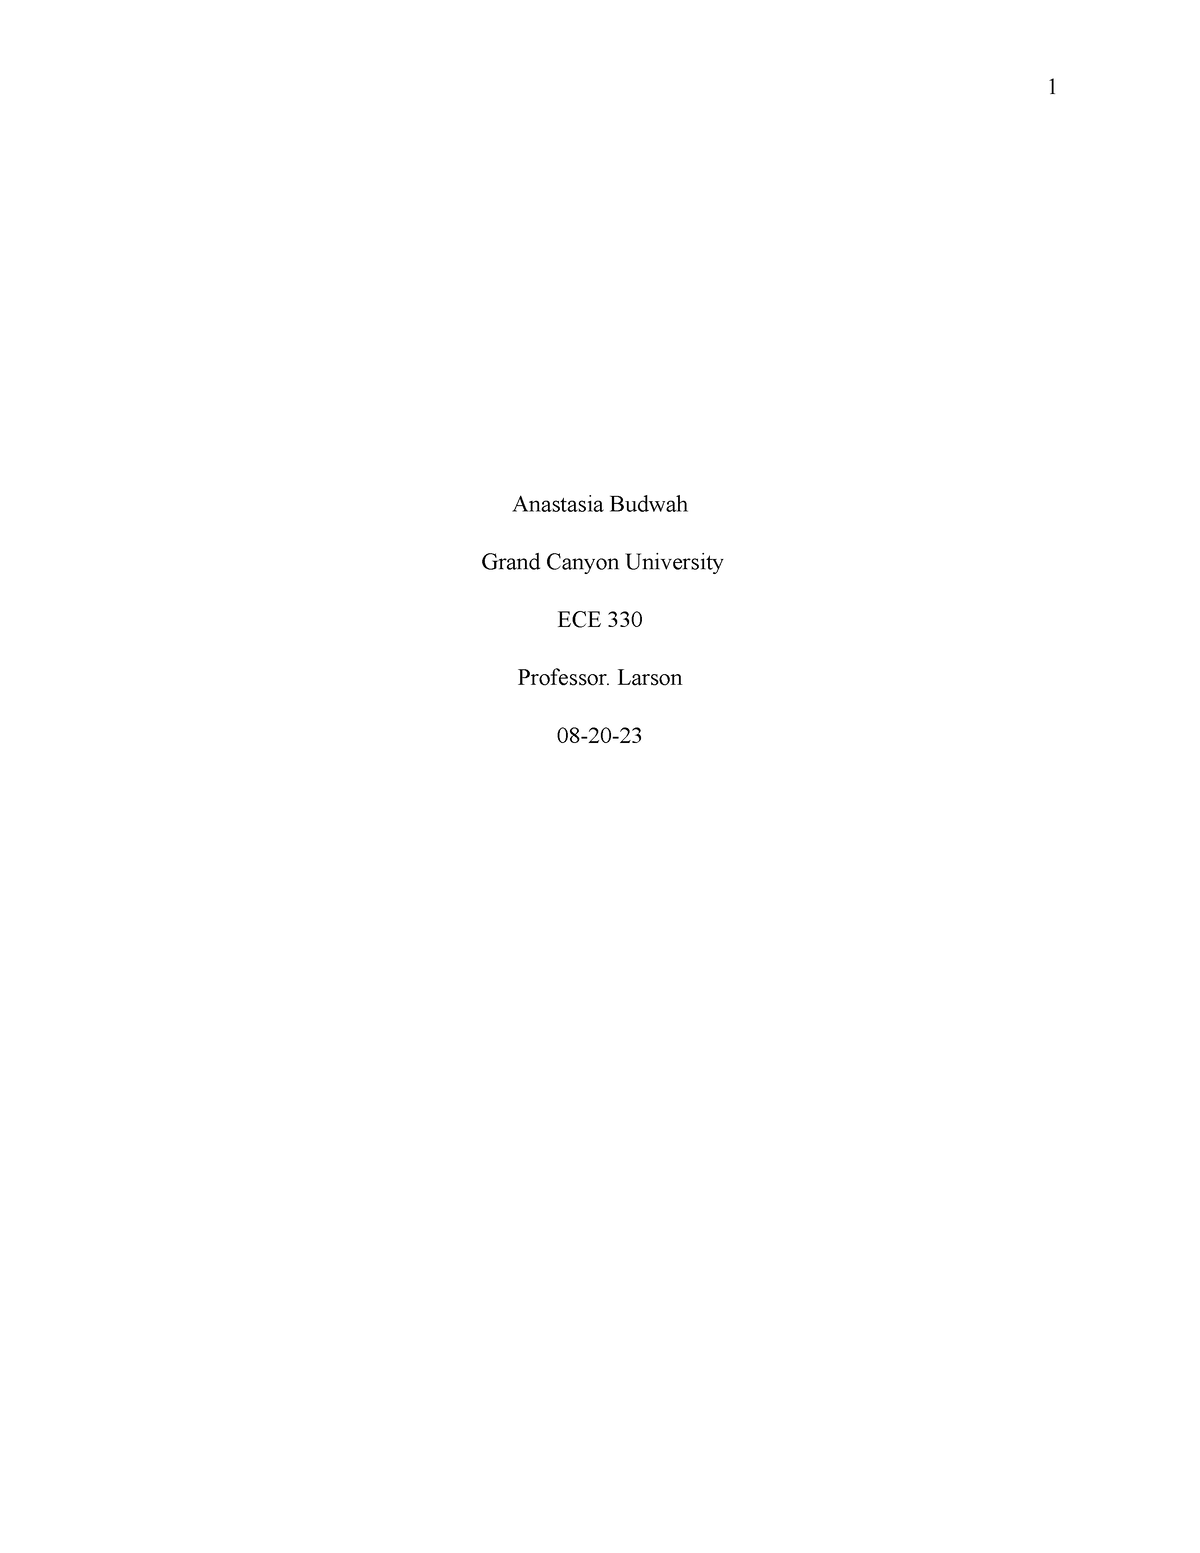 EDU 330 Topic 4 Assignment Template Please use this template ...